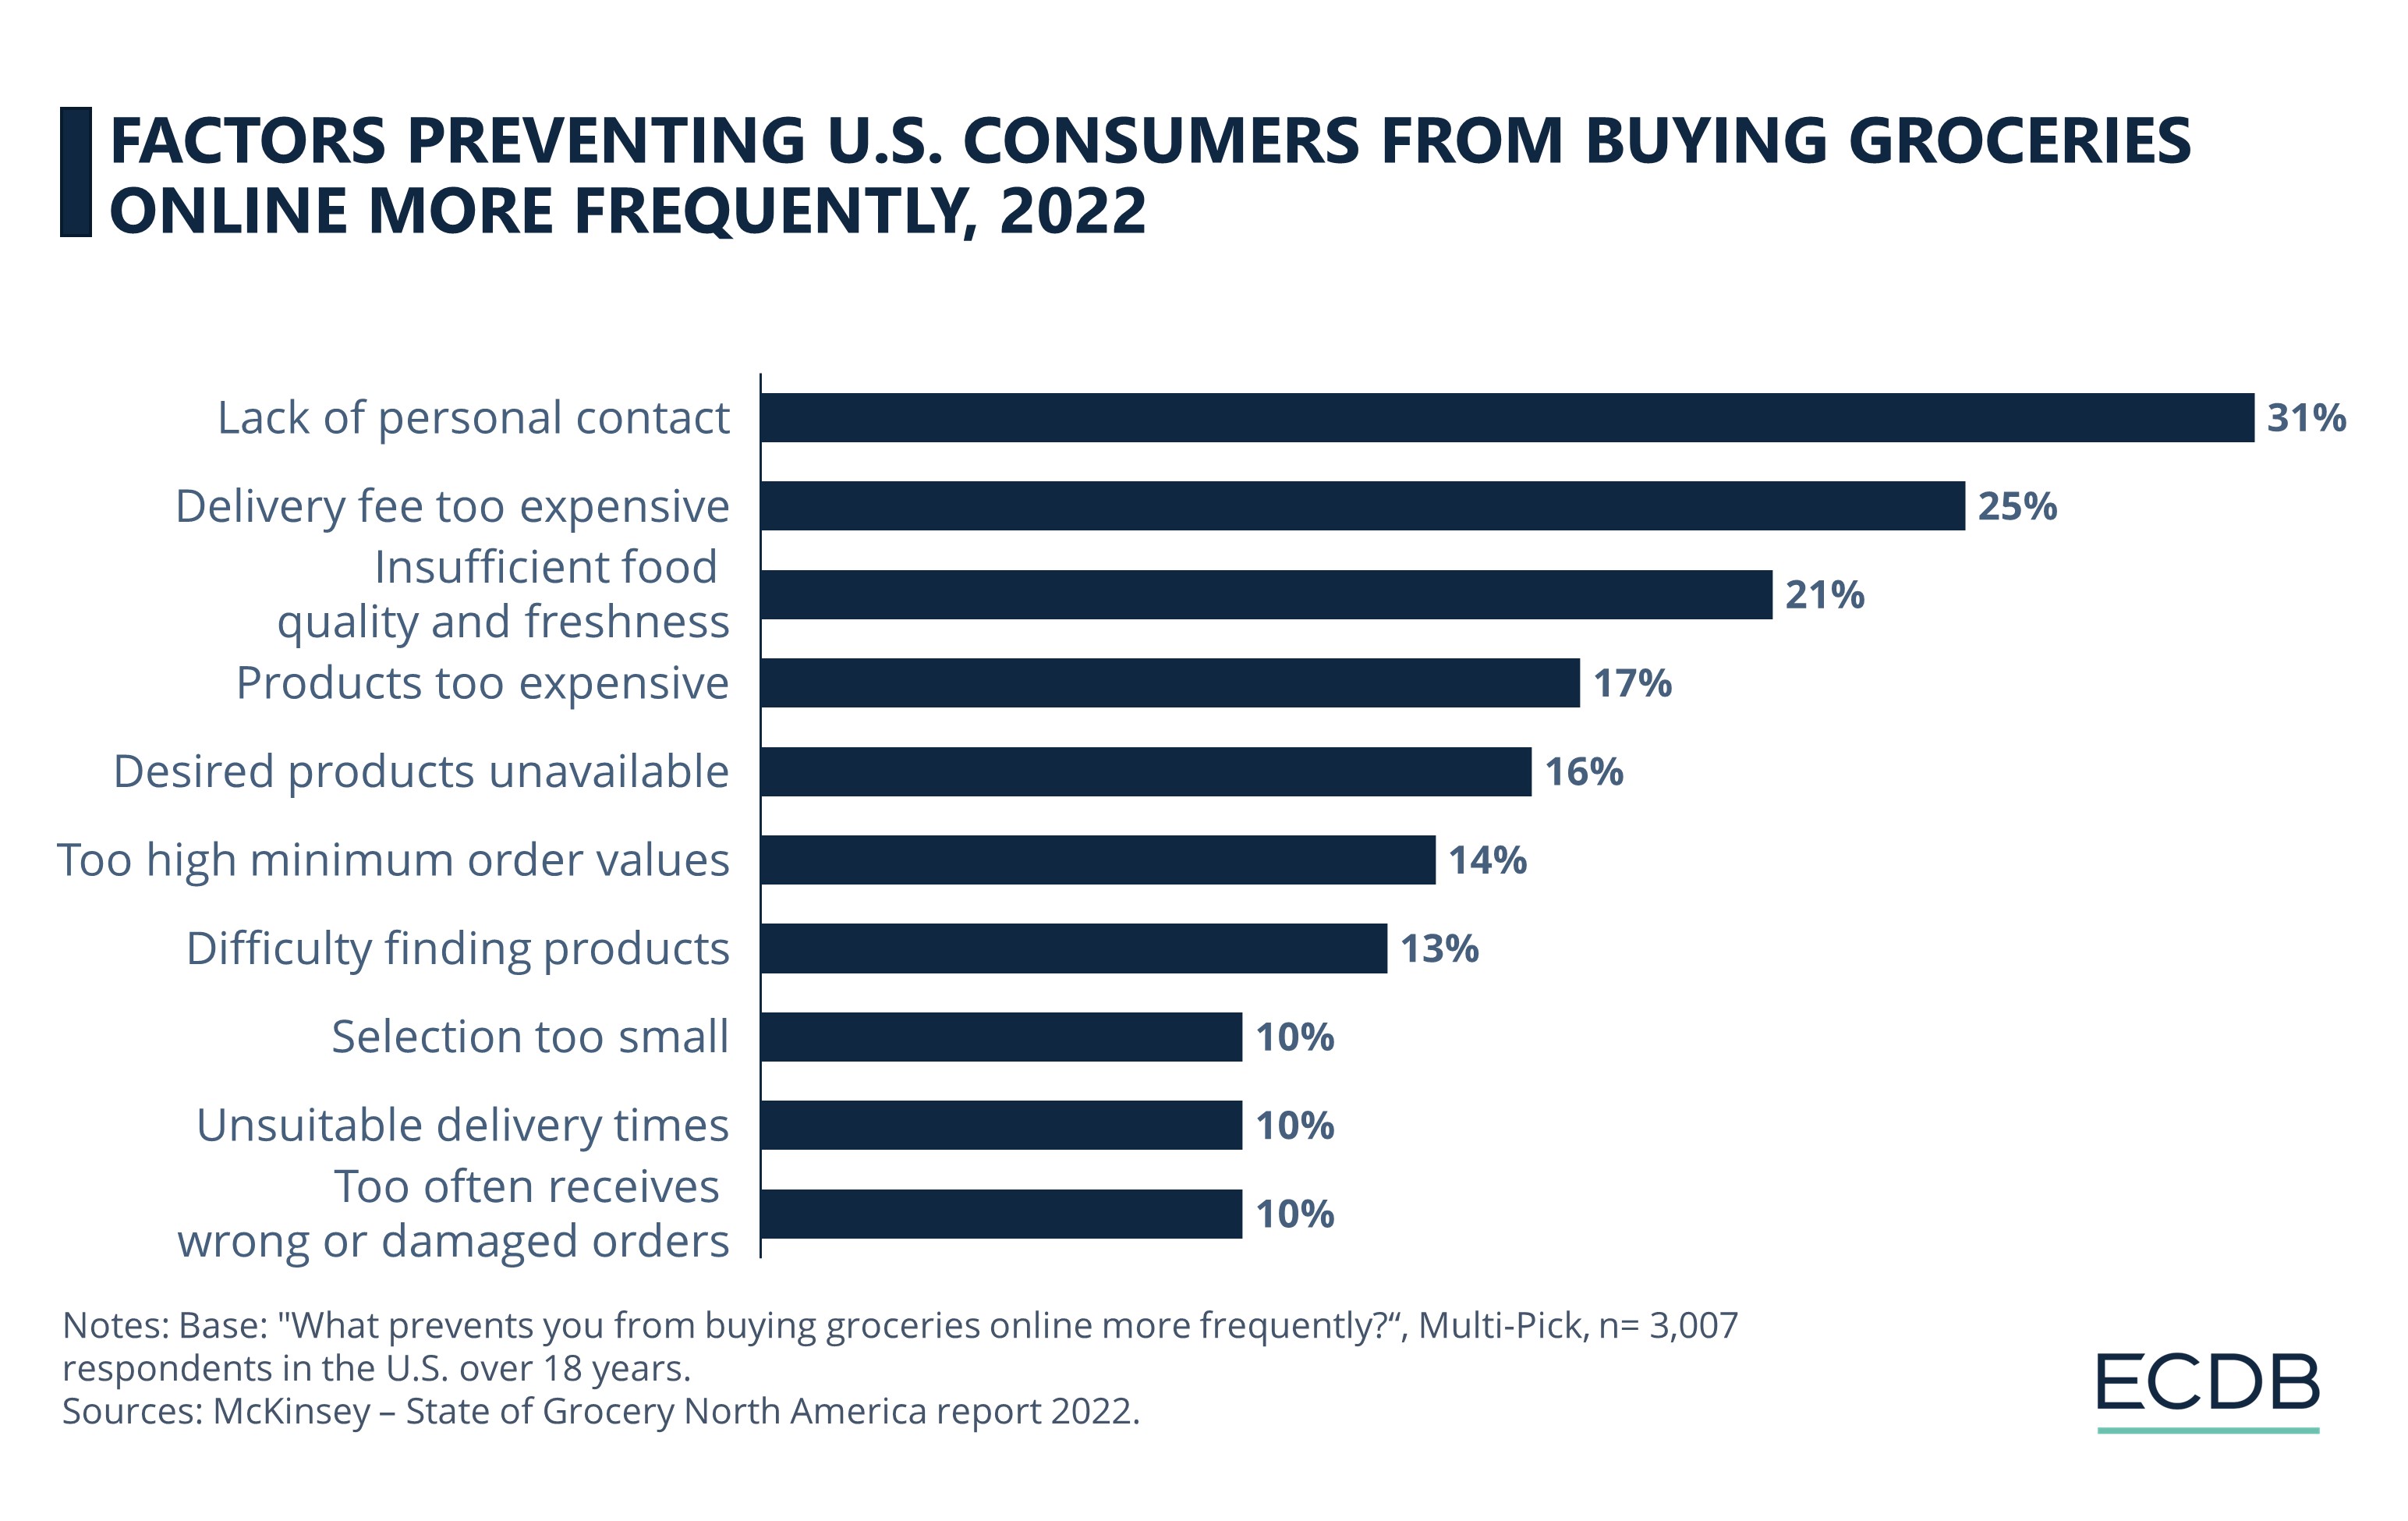 Factores Preventing U.S. Consumers from Buying Groceries Online More Frequently, 2022